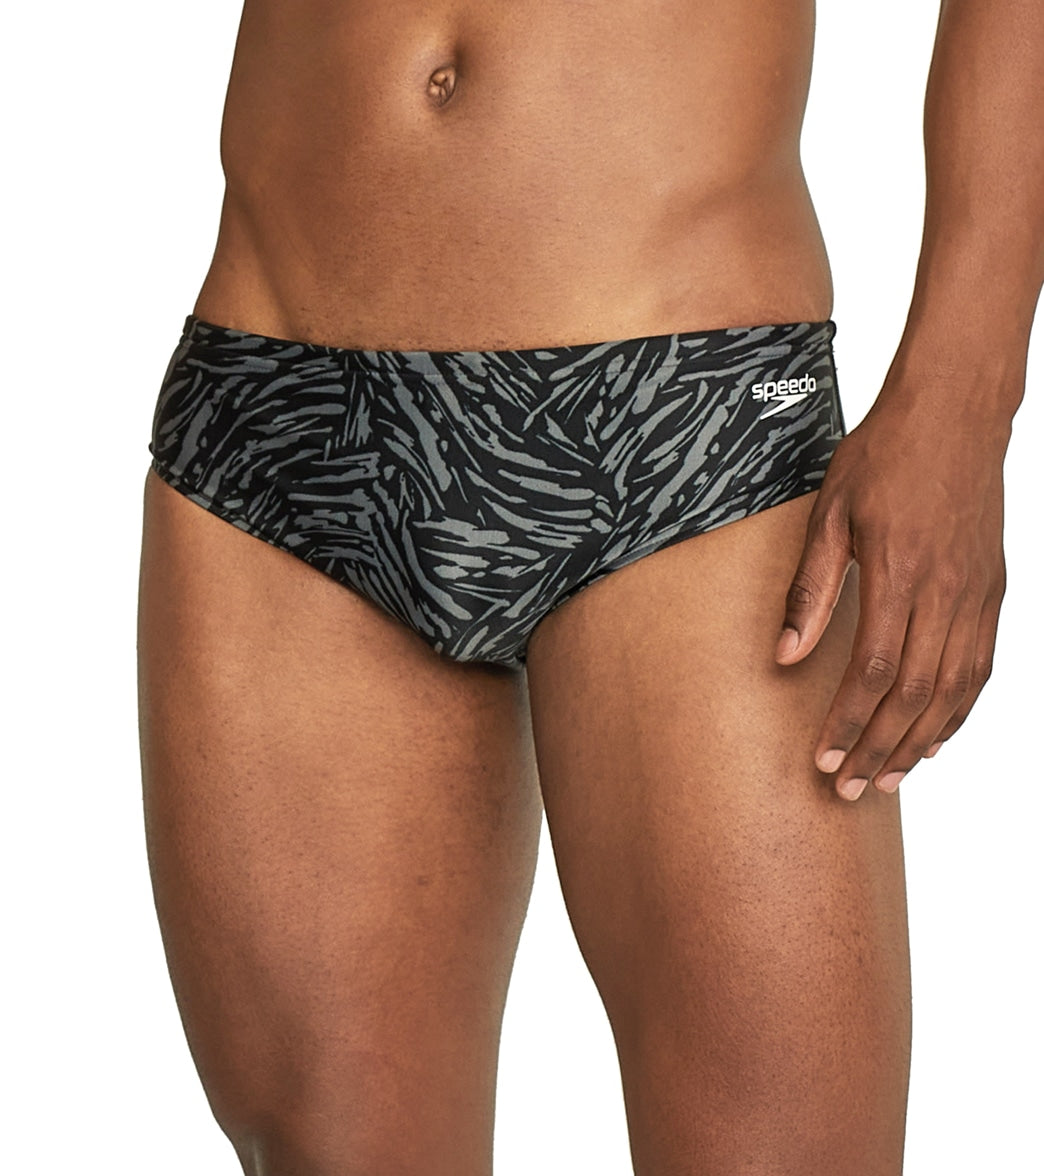 Speedo Men's Abstract Tiger Brief Swimsuit at SwimOutlet.com